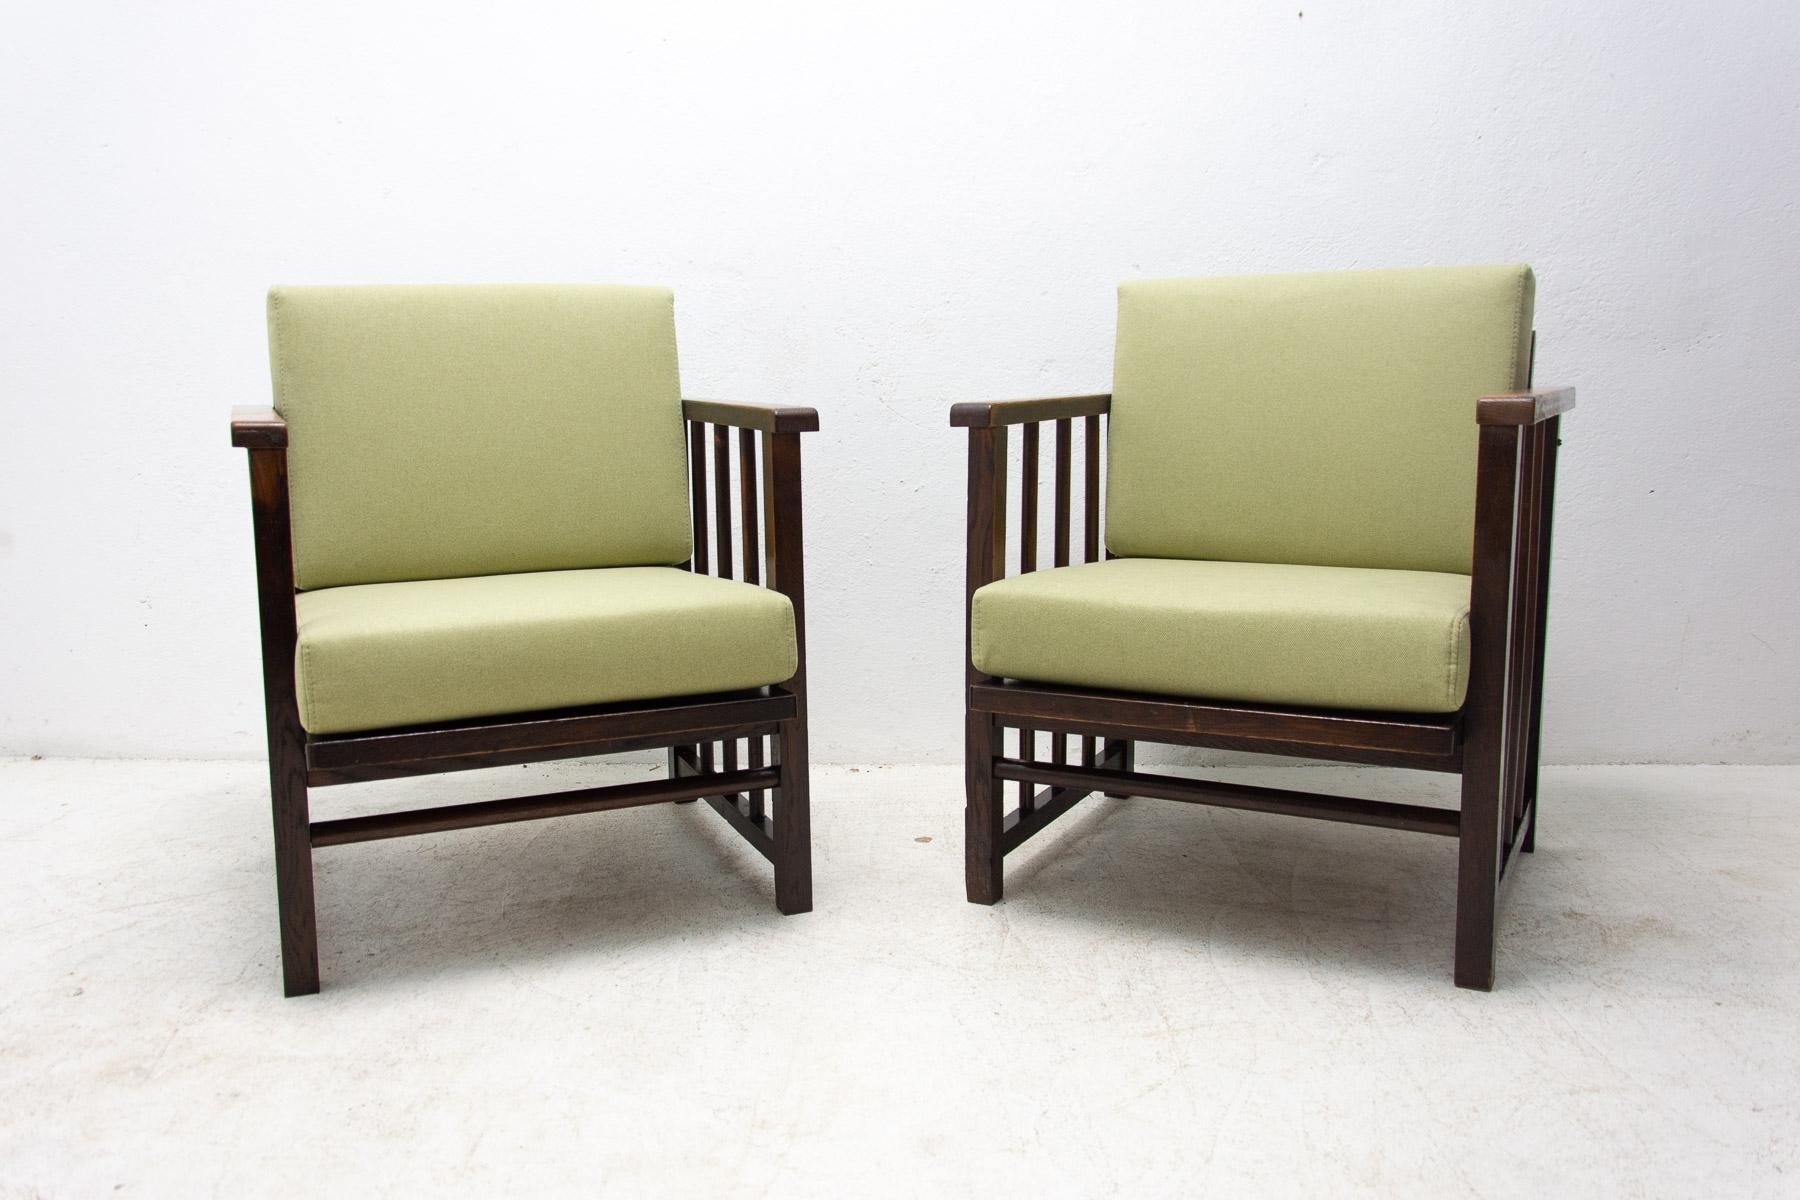 These ART DECO bentwood armchairs were designed by Jaroslav Grunt in cooperation with Jan Vanek(ÚP Závody) / Czechoslovakia, 1920´s.

Made in the former Czechoslovakia in the 1930’s. Made of beech wood. They are in very good condition, the